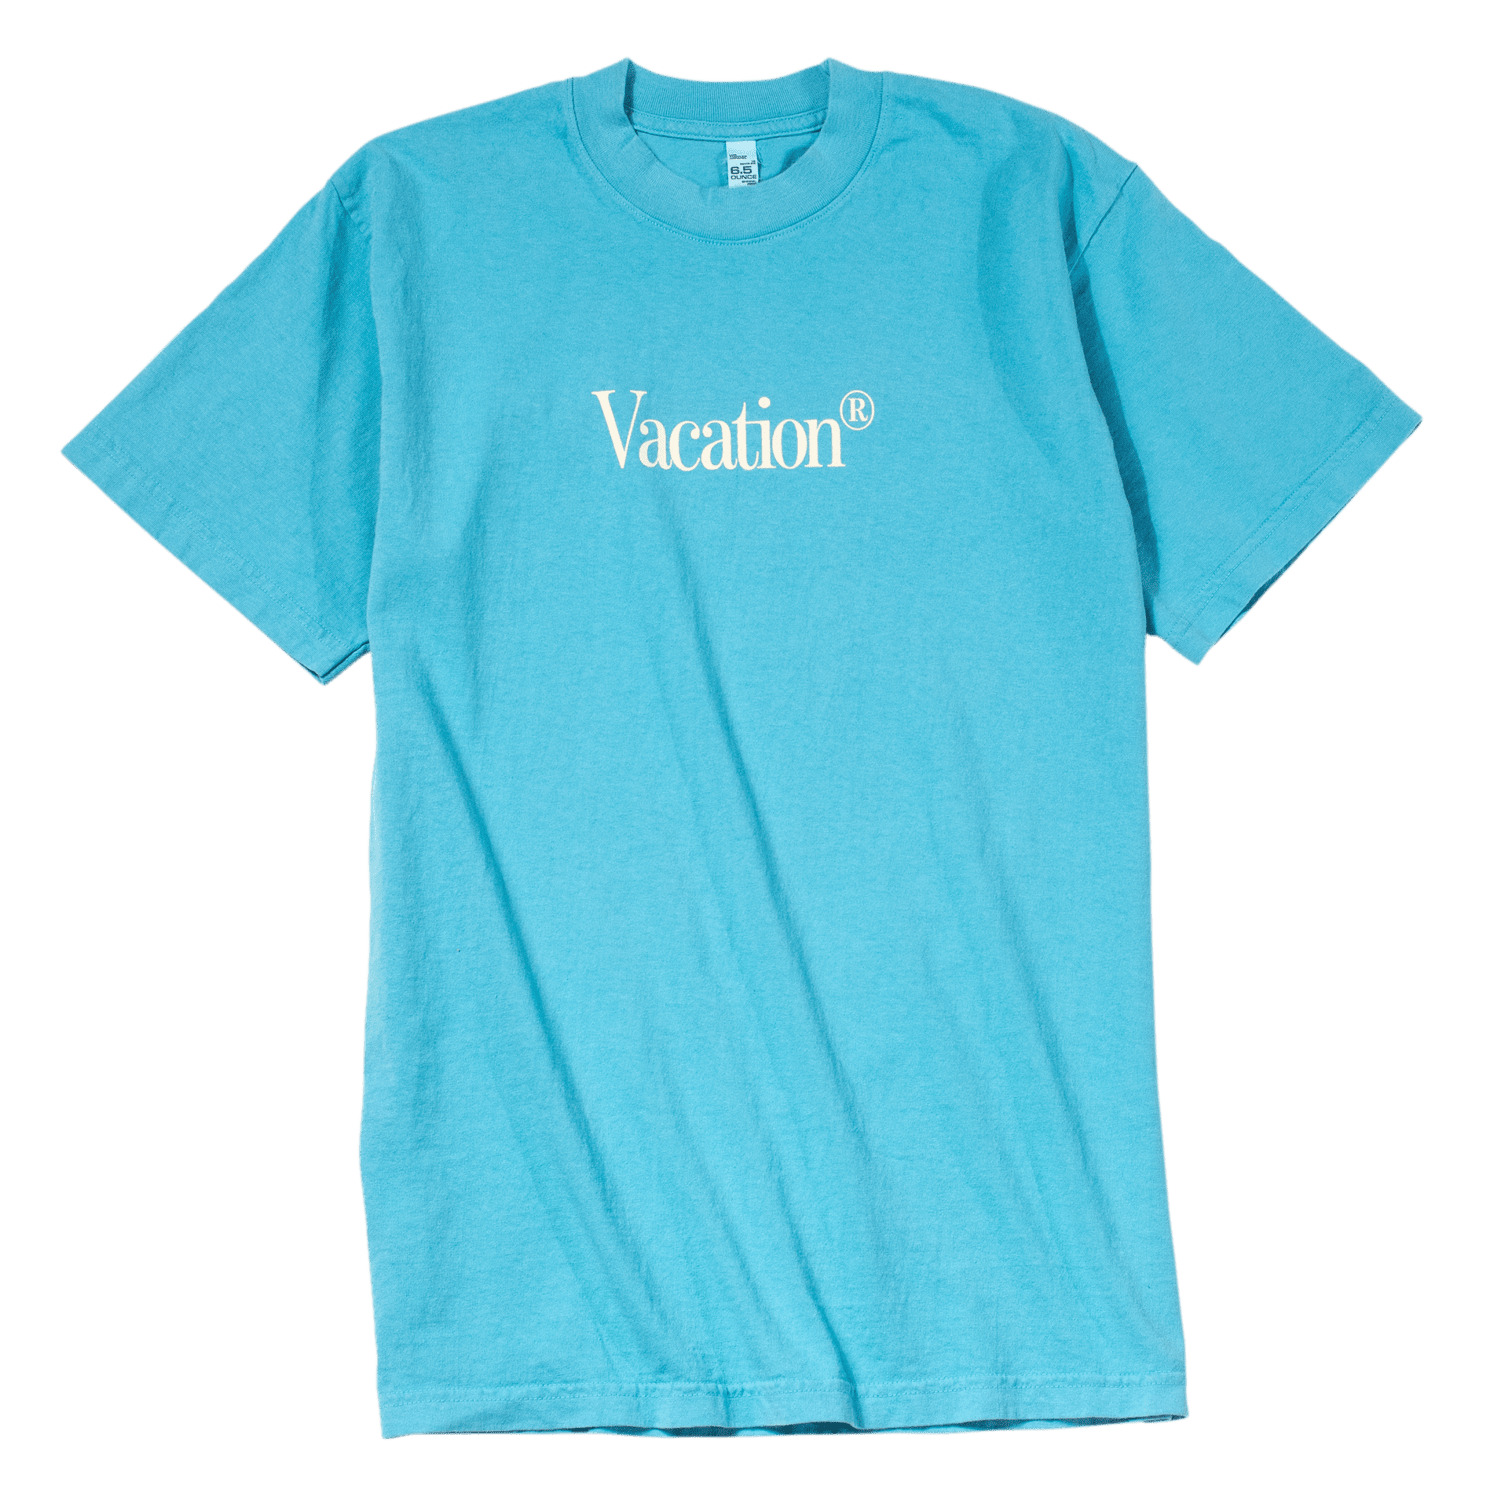 Image of Vacation® Teal T-Shirt